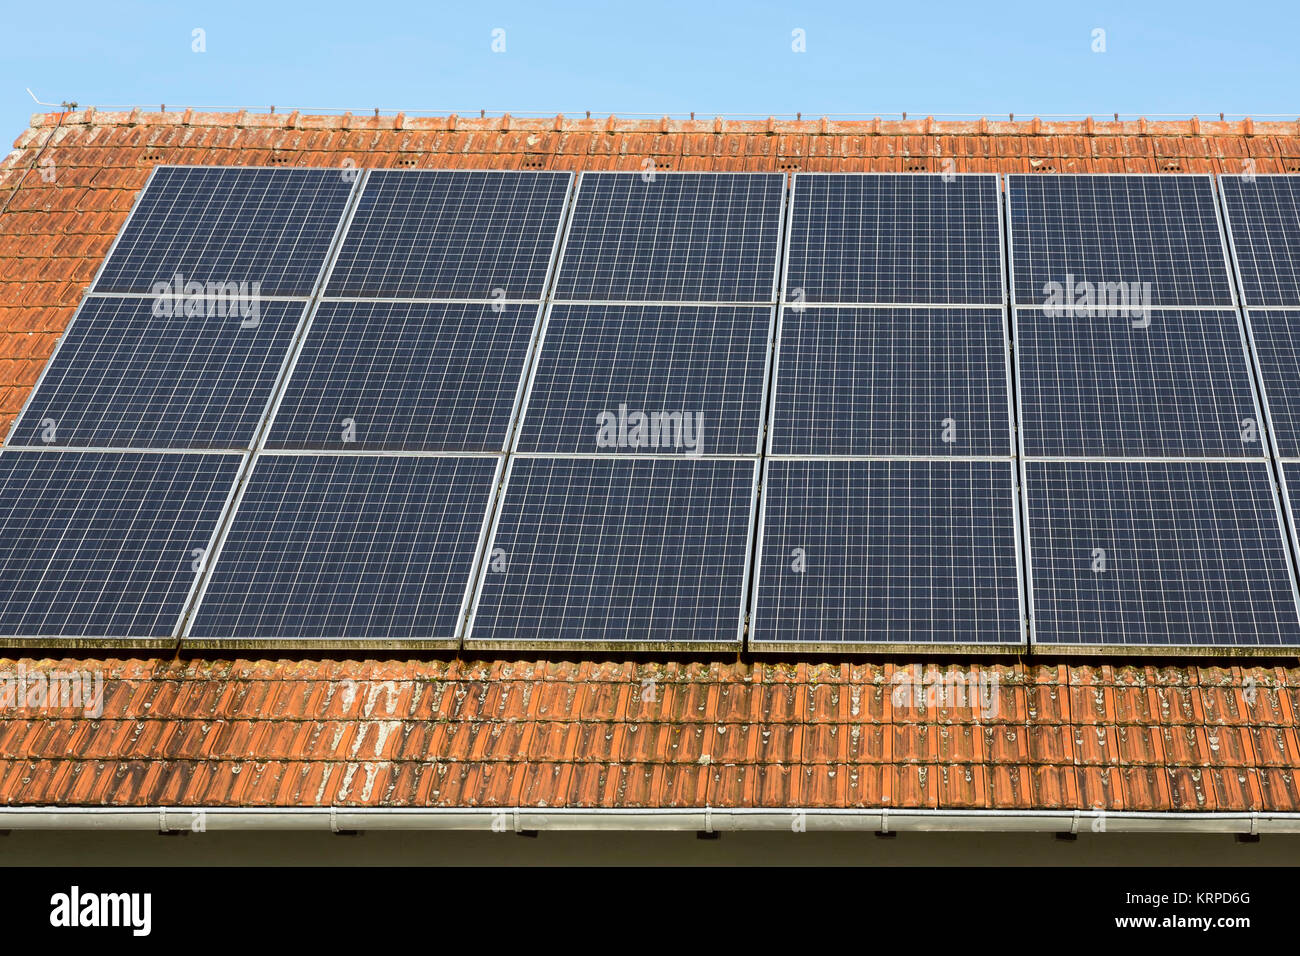 photovoltaic system on a tile roof Stock Photo